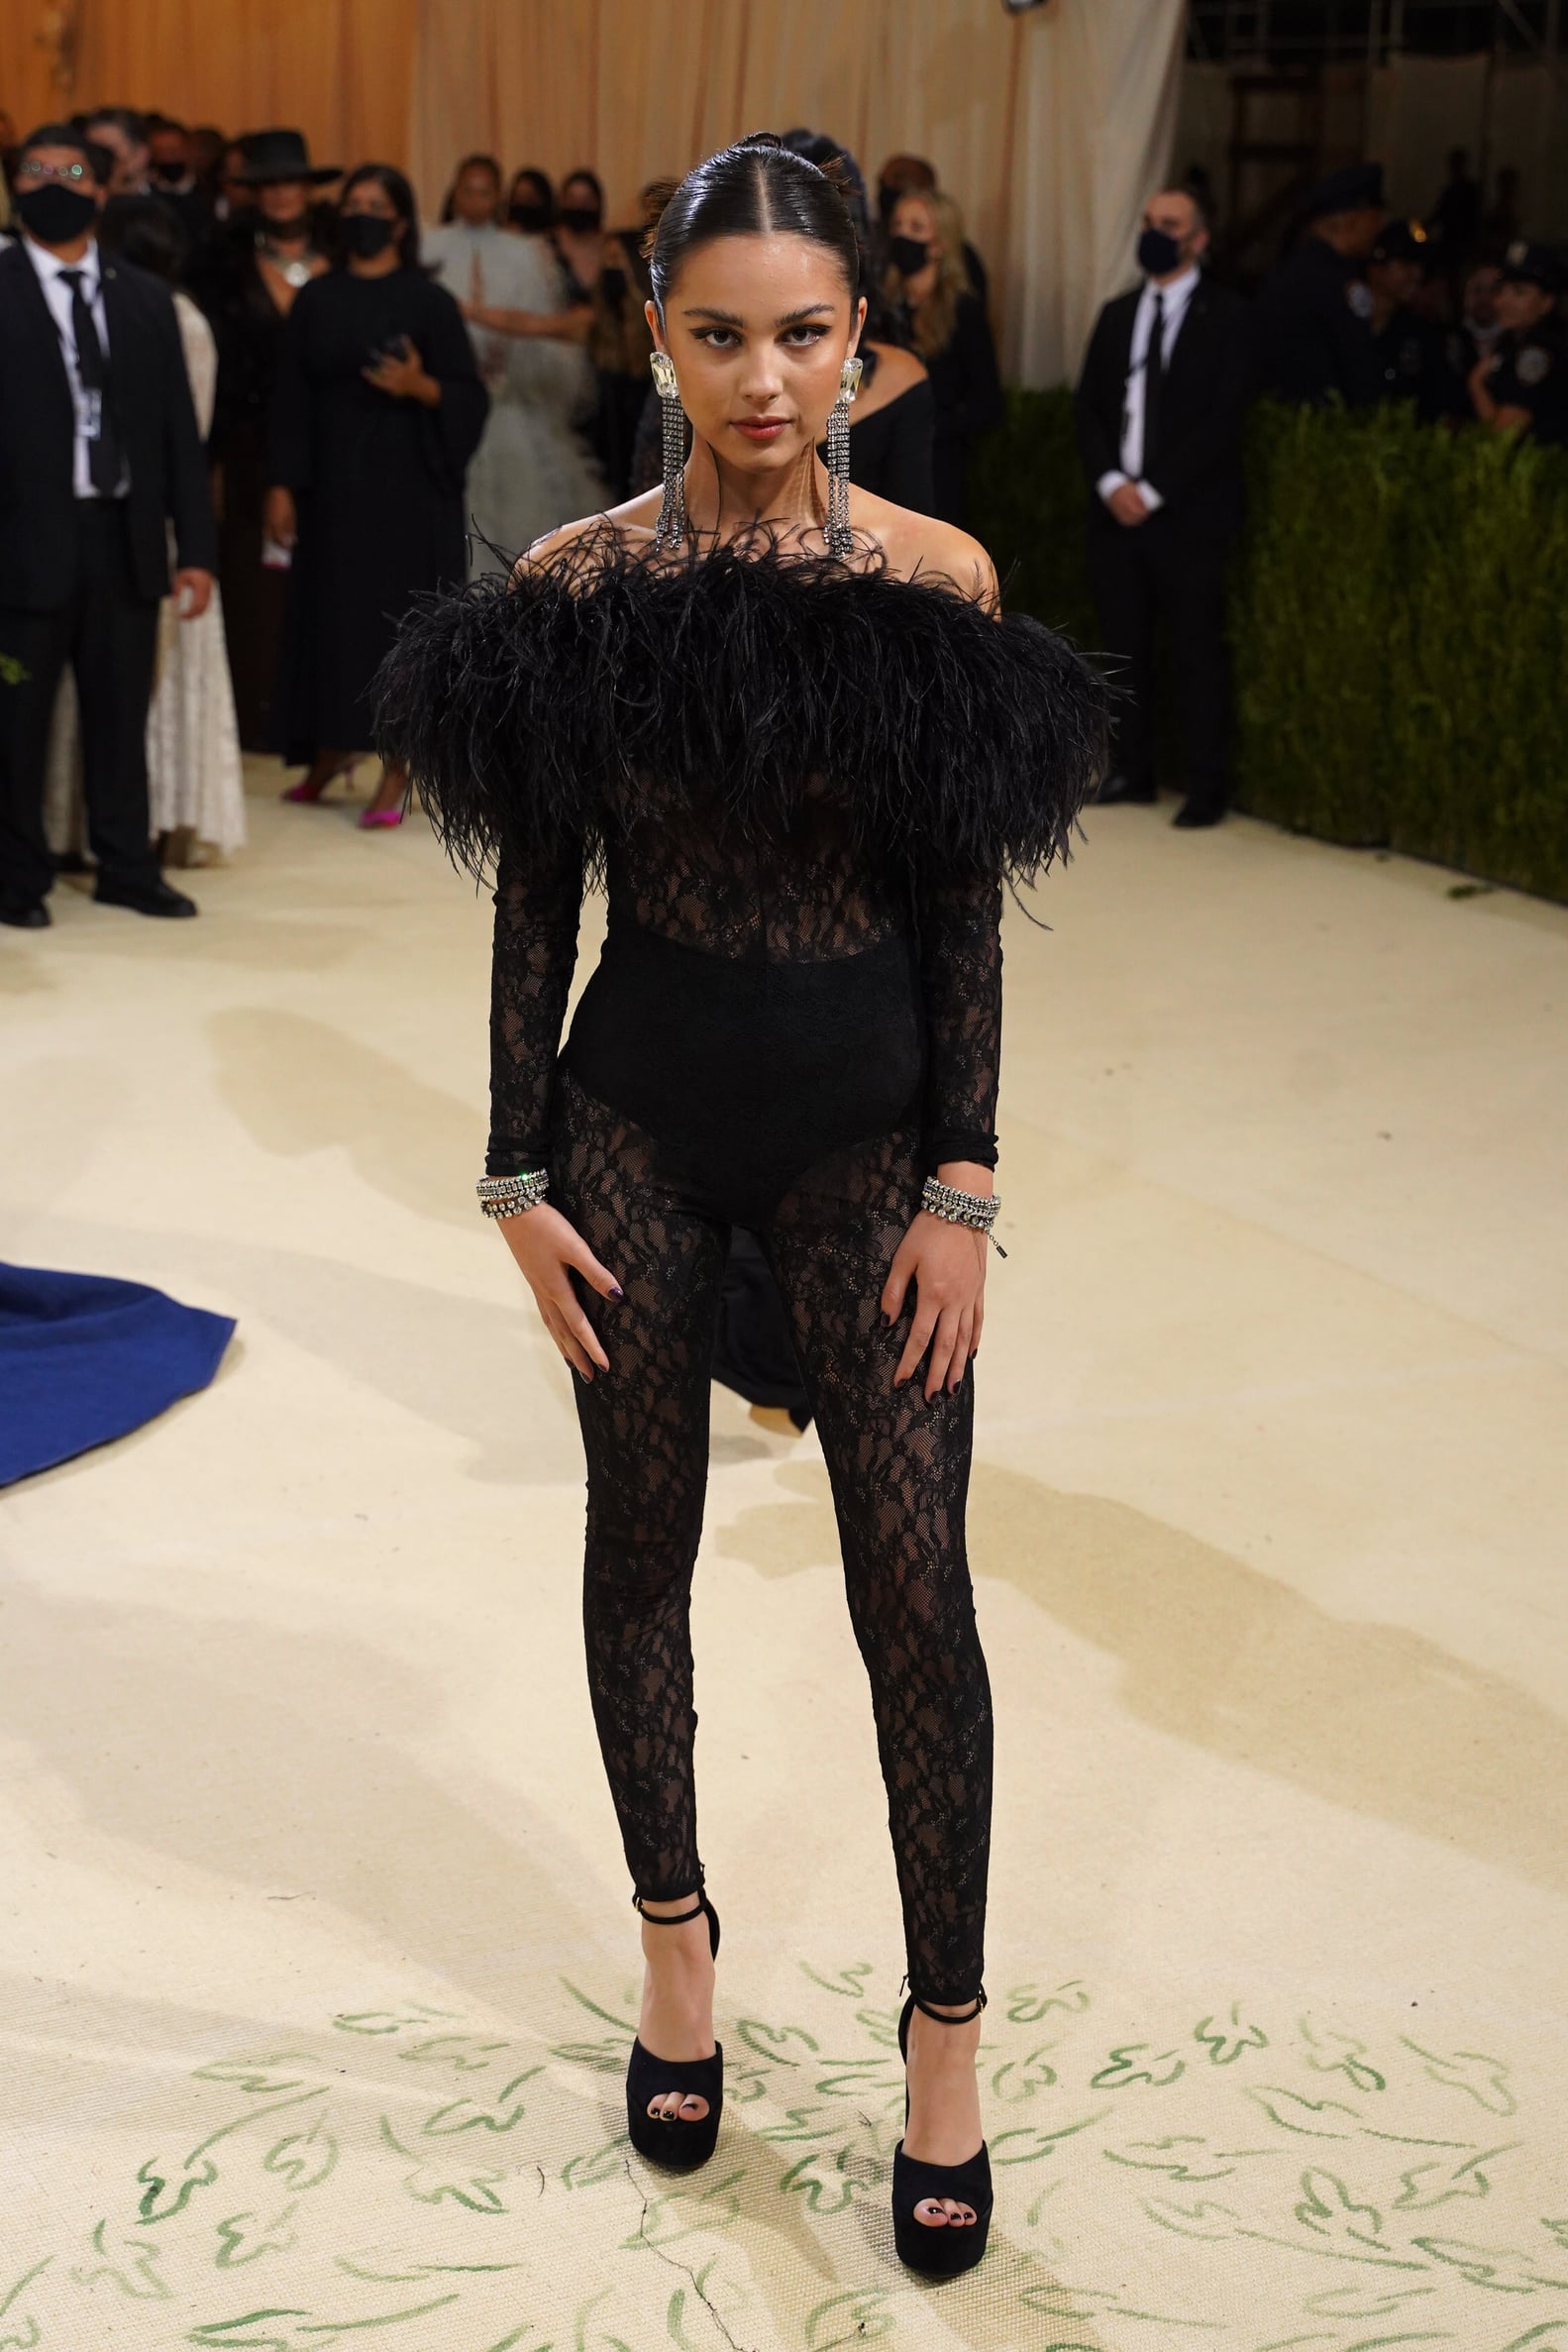 The Met Gala: Who Goes, Who Hosts, and Who Decides the Theme | POPSUGAR ...